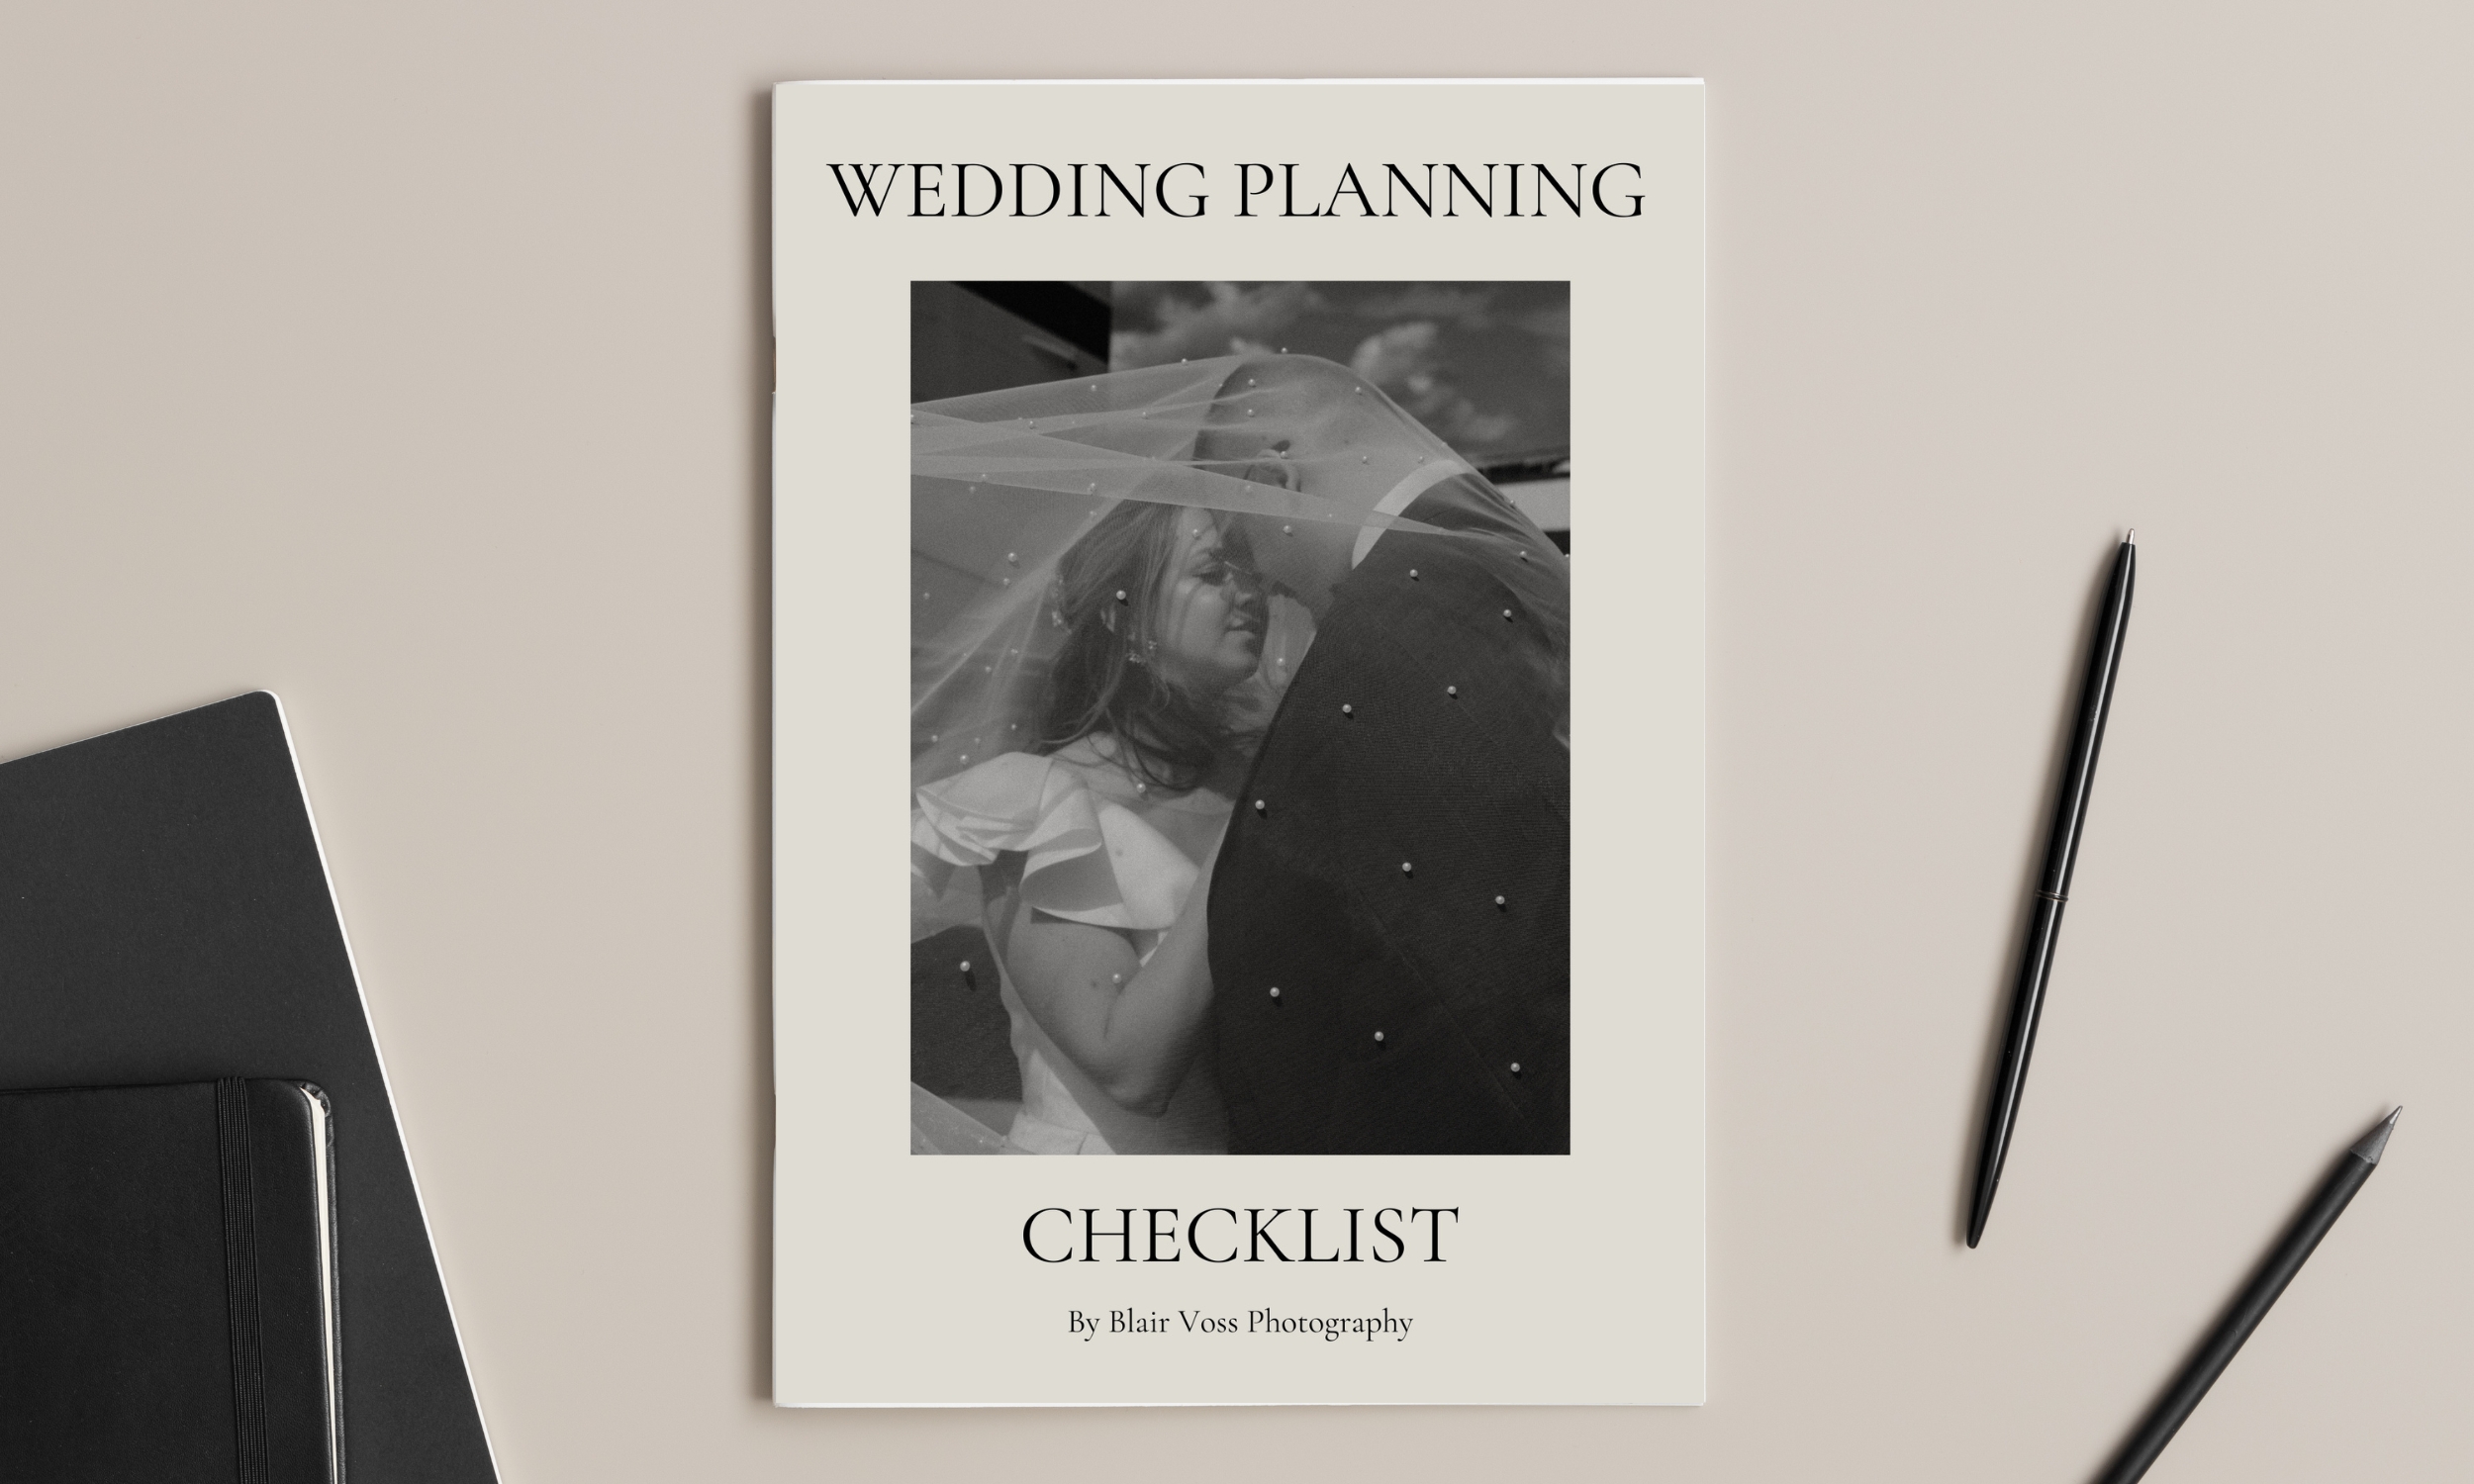 wedding planning guide for couples looking for tips on a stress-free wedding day.